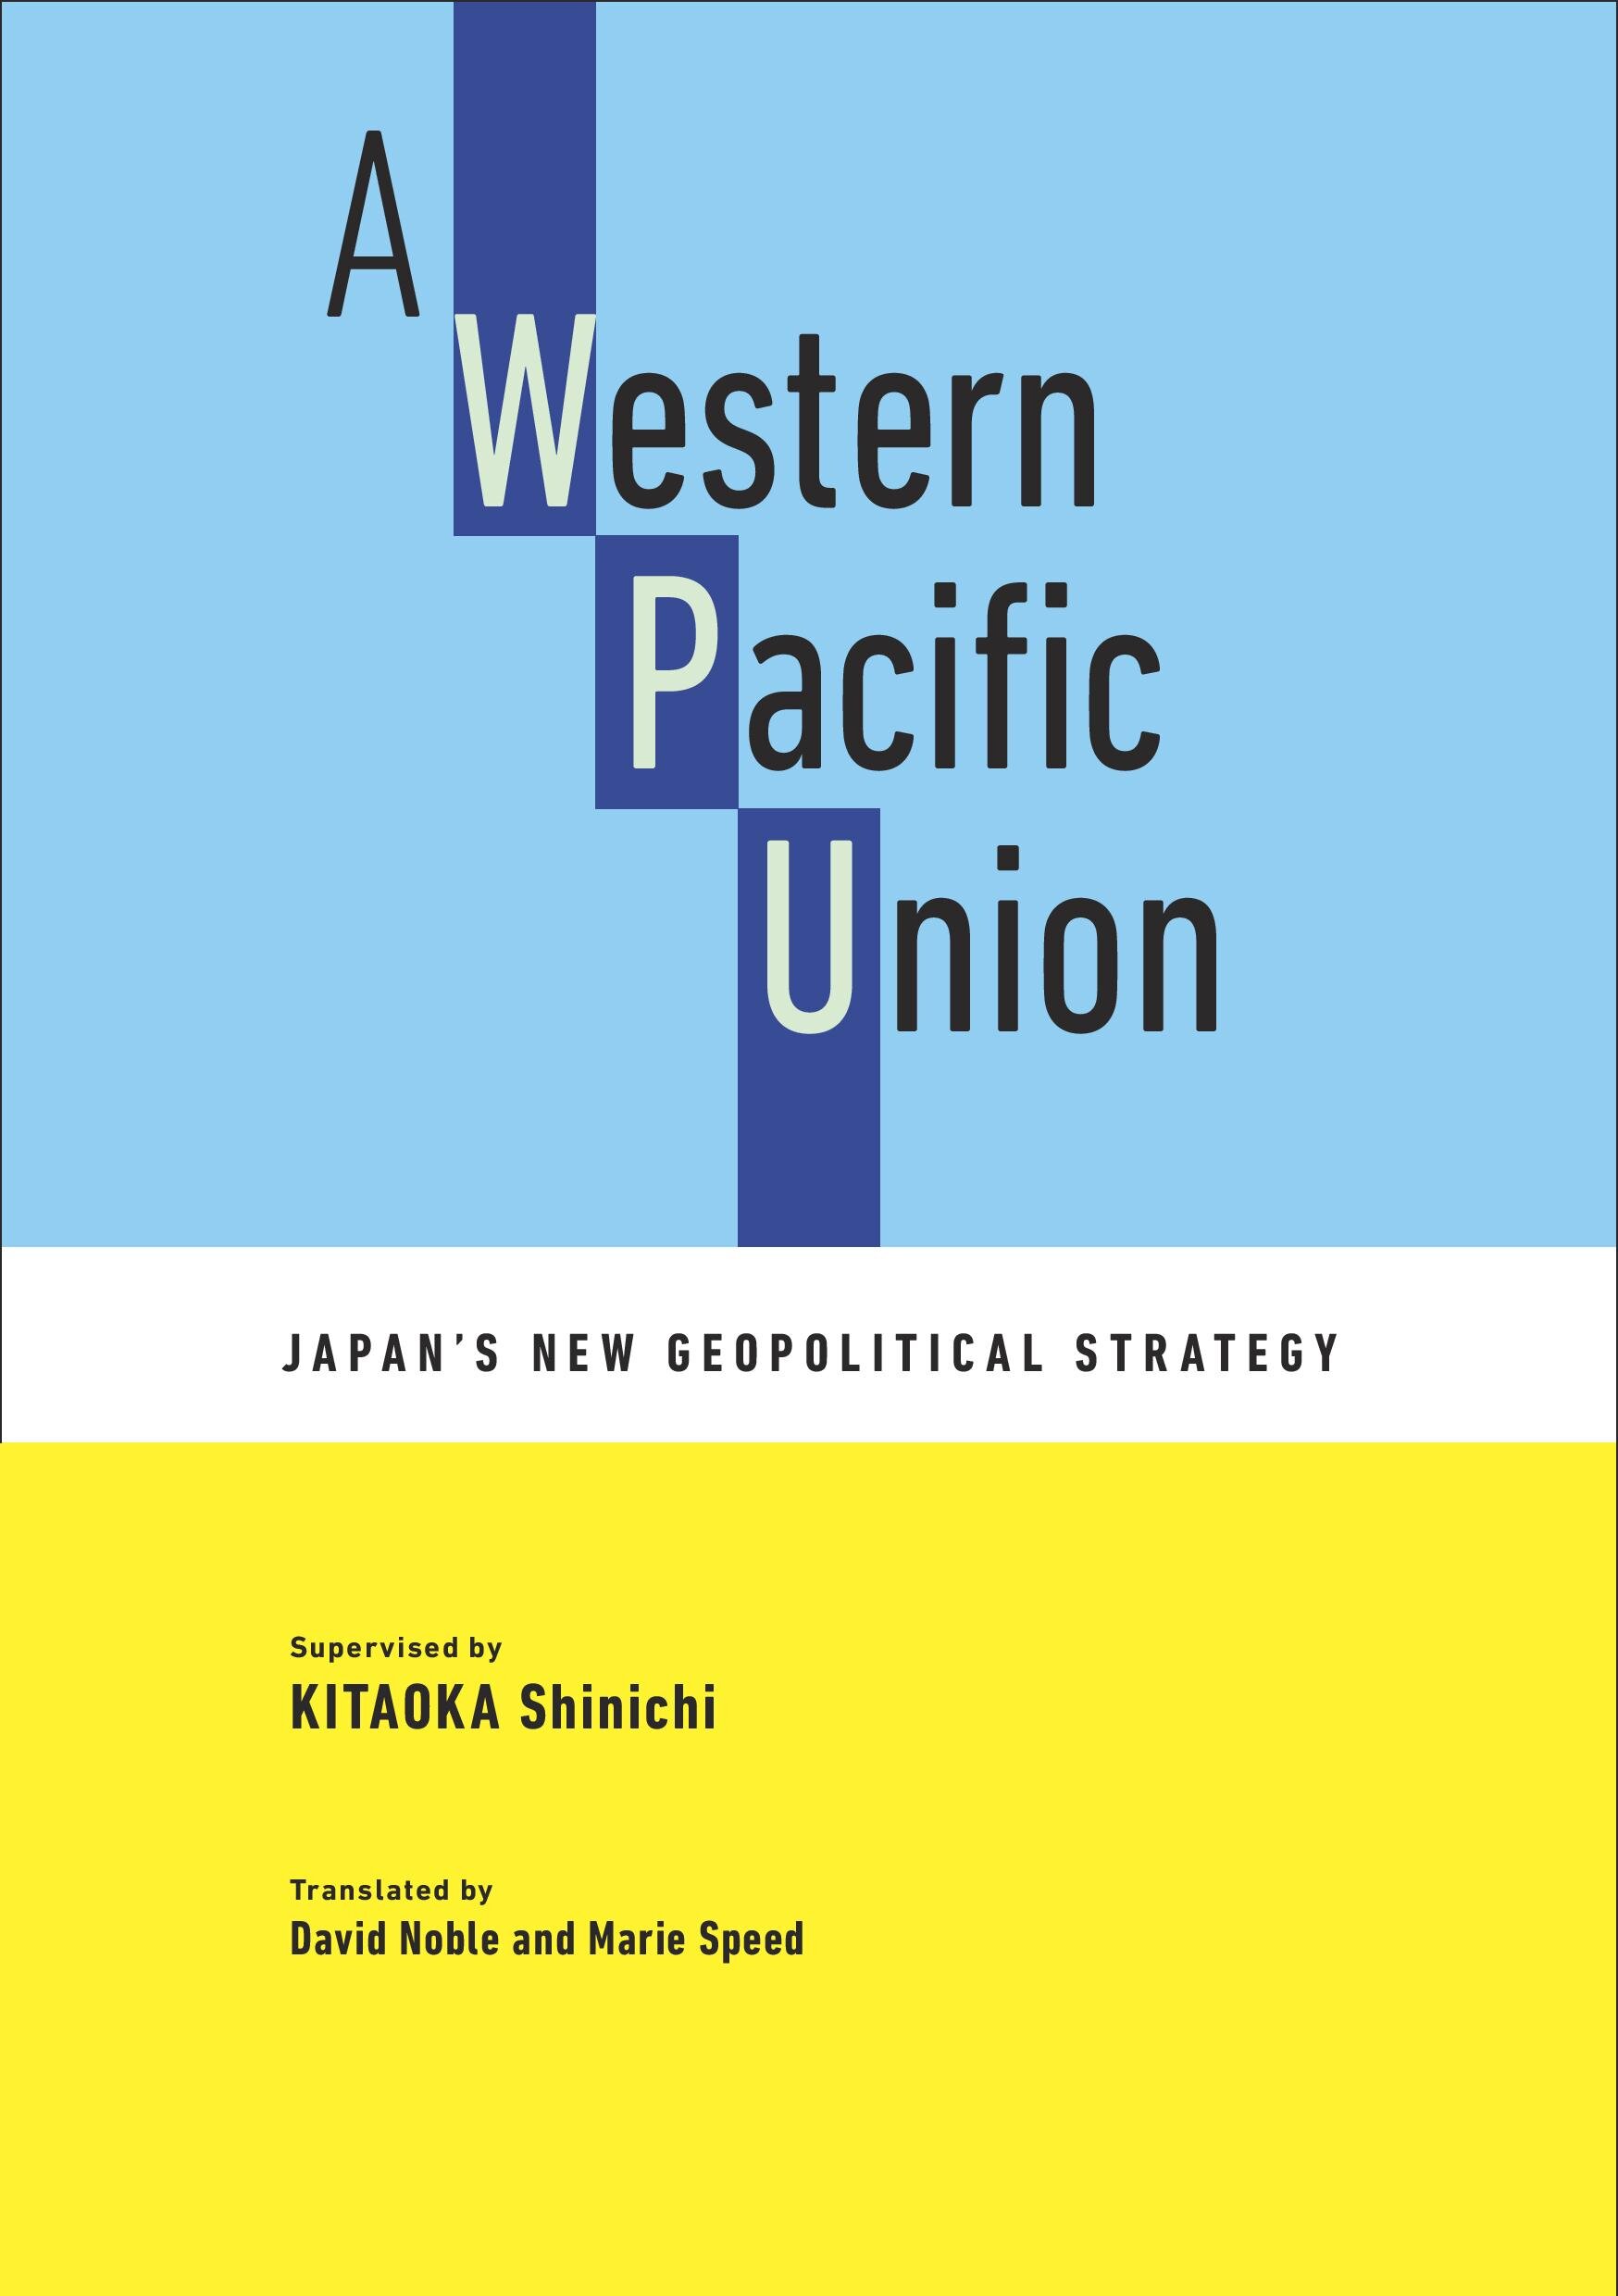 A Western Pacific Union